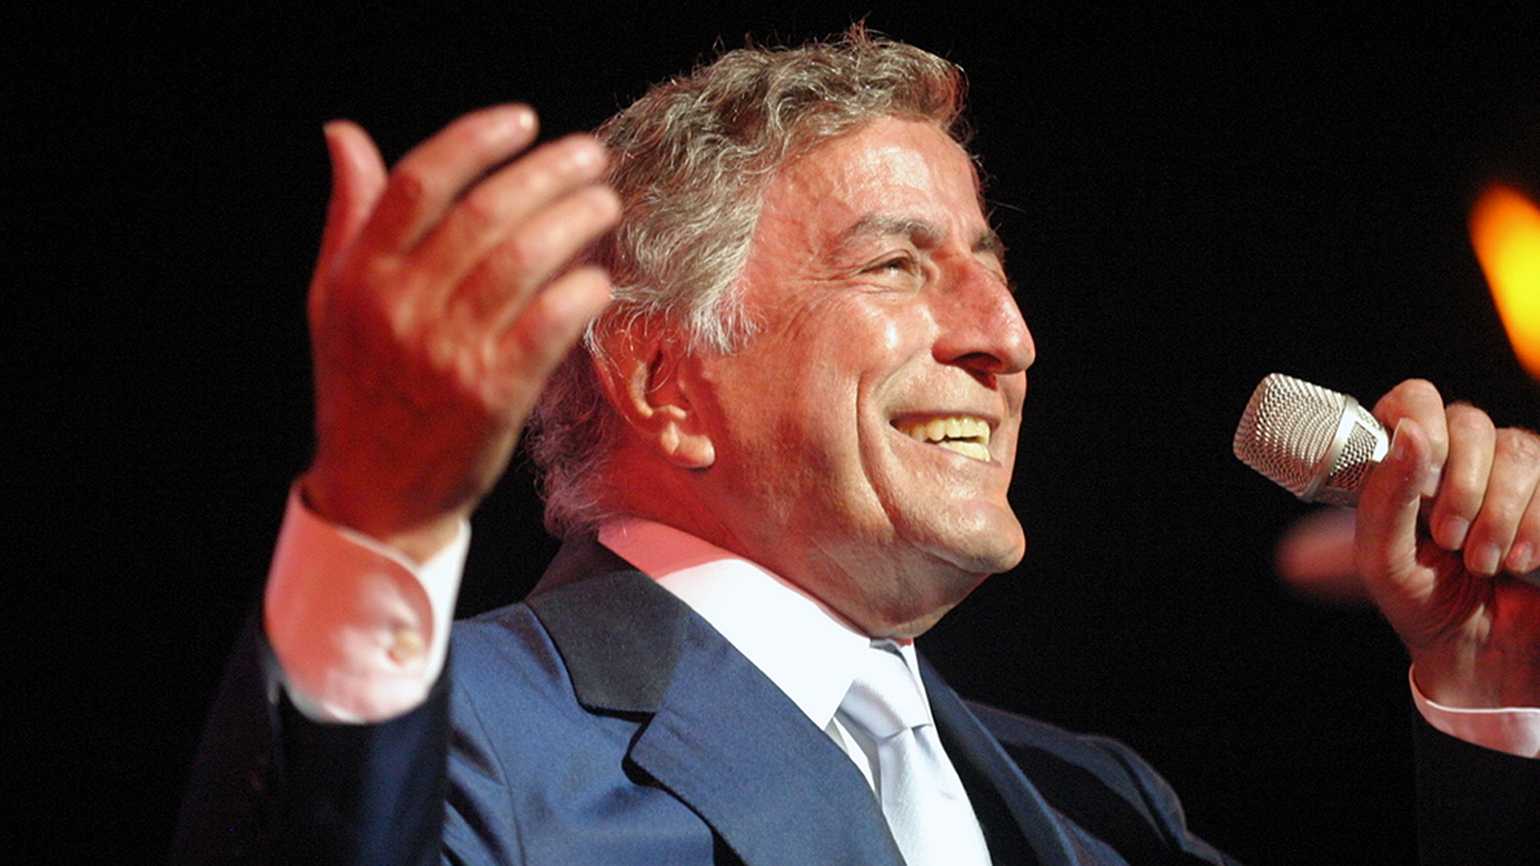 Image of Tony Bennett in his senior years performing. His left hand holding the microphone, his right hand uplifted and a smile on his face. 